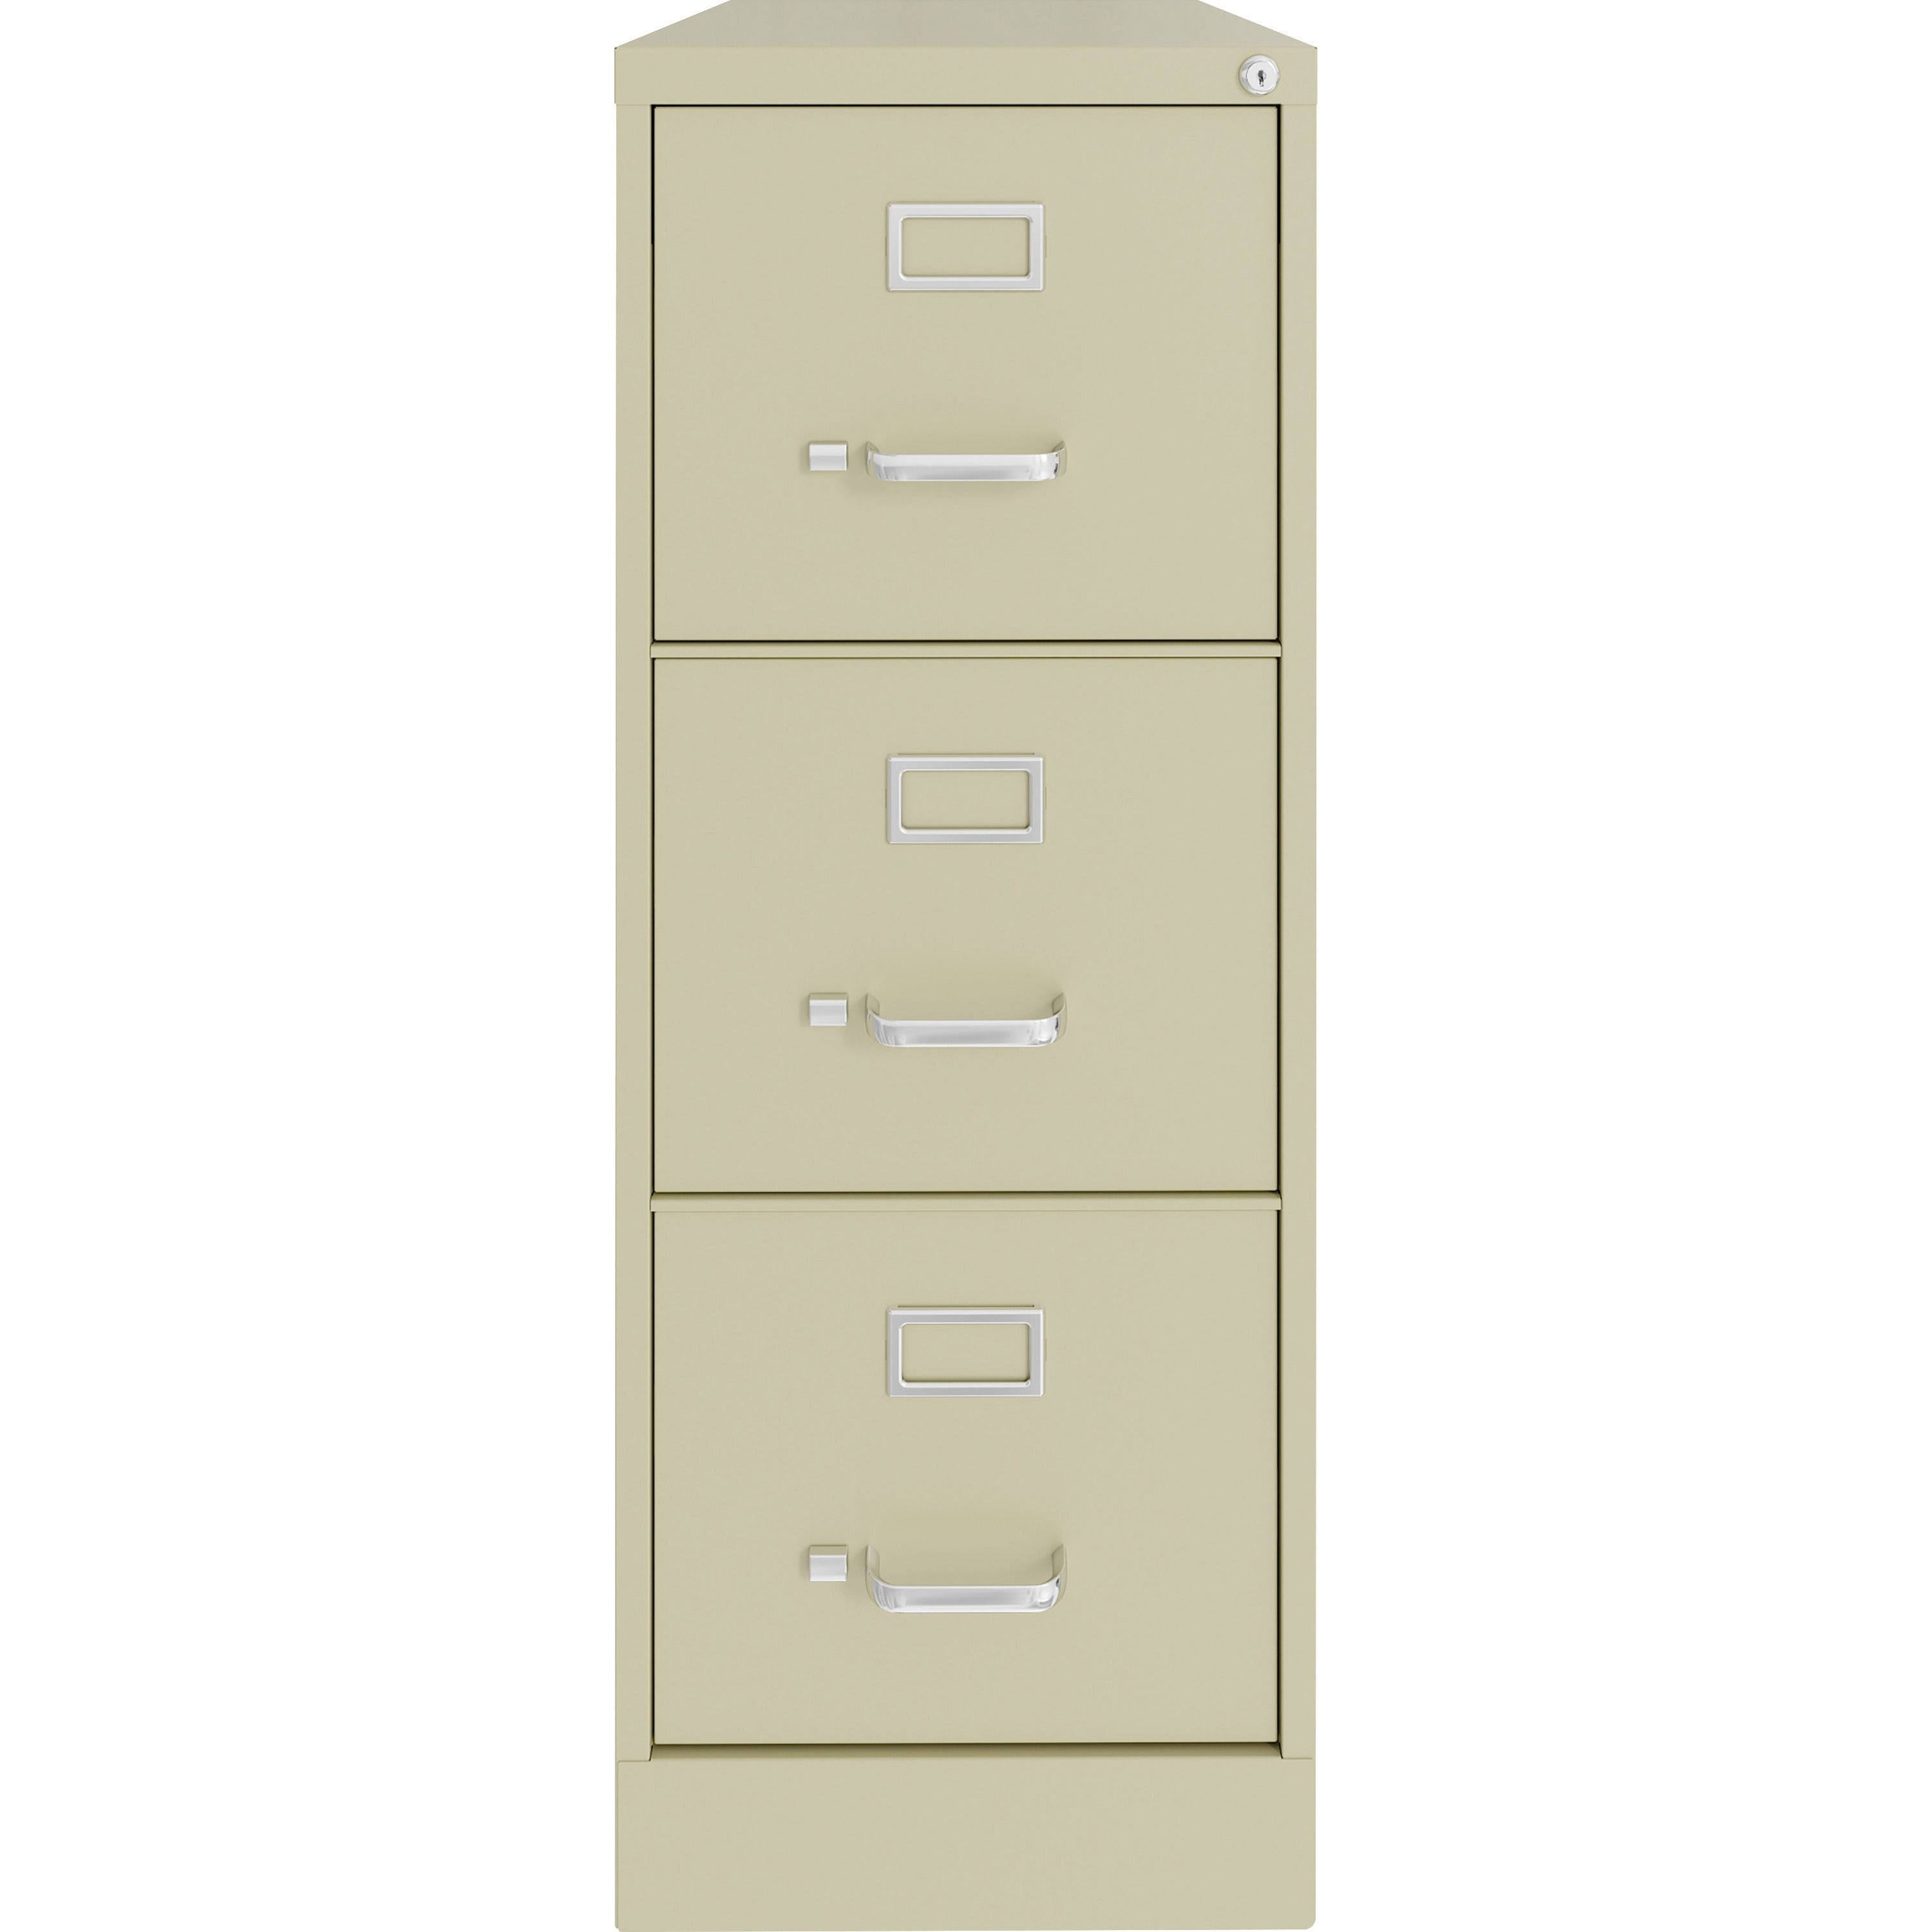 lorell-fortress-series-22-commercial-grade-vertical-file-cabinet-15-x-22-x-402-3-x-drawers-for-file-letter-vertical-ball-bearing-suspension-removable-lock-pull-handle-wire-management-putty-steel-recycled_llr42296 - 2